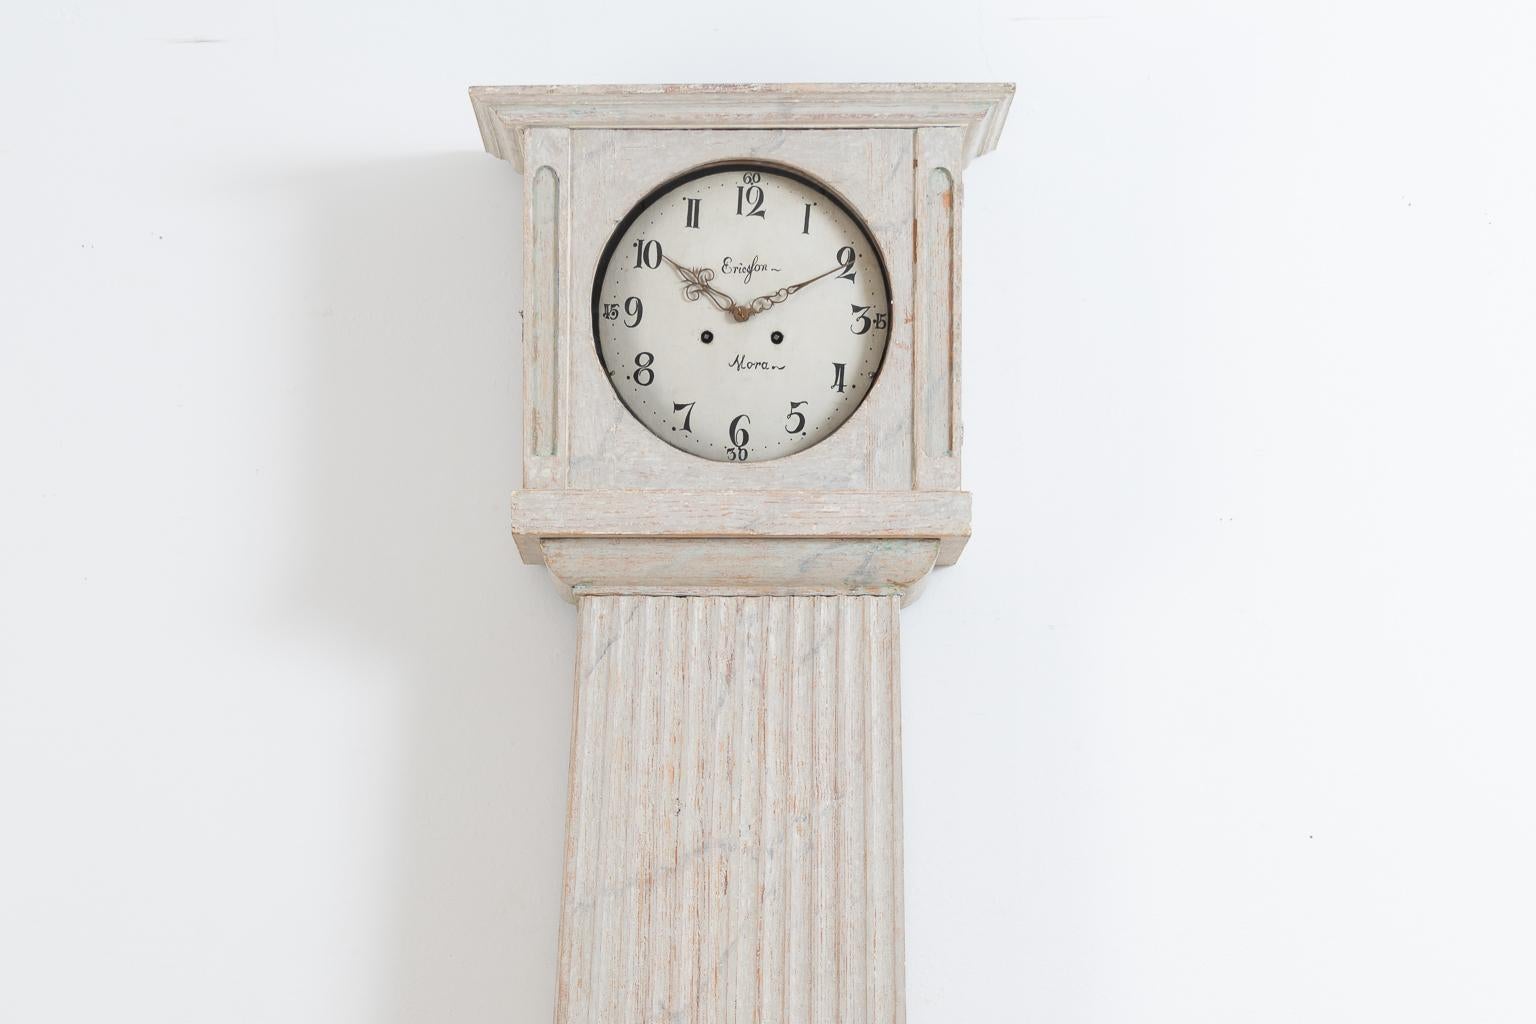 Swedish long case clock from the Gustavian period. The clock is unusual because of its straight model. Decorated with a ribbed decor that stretches the majority of the case, spanning from just under the head down to the foot on three sides. The